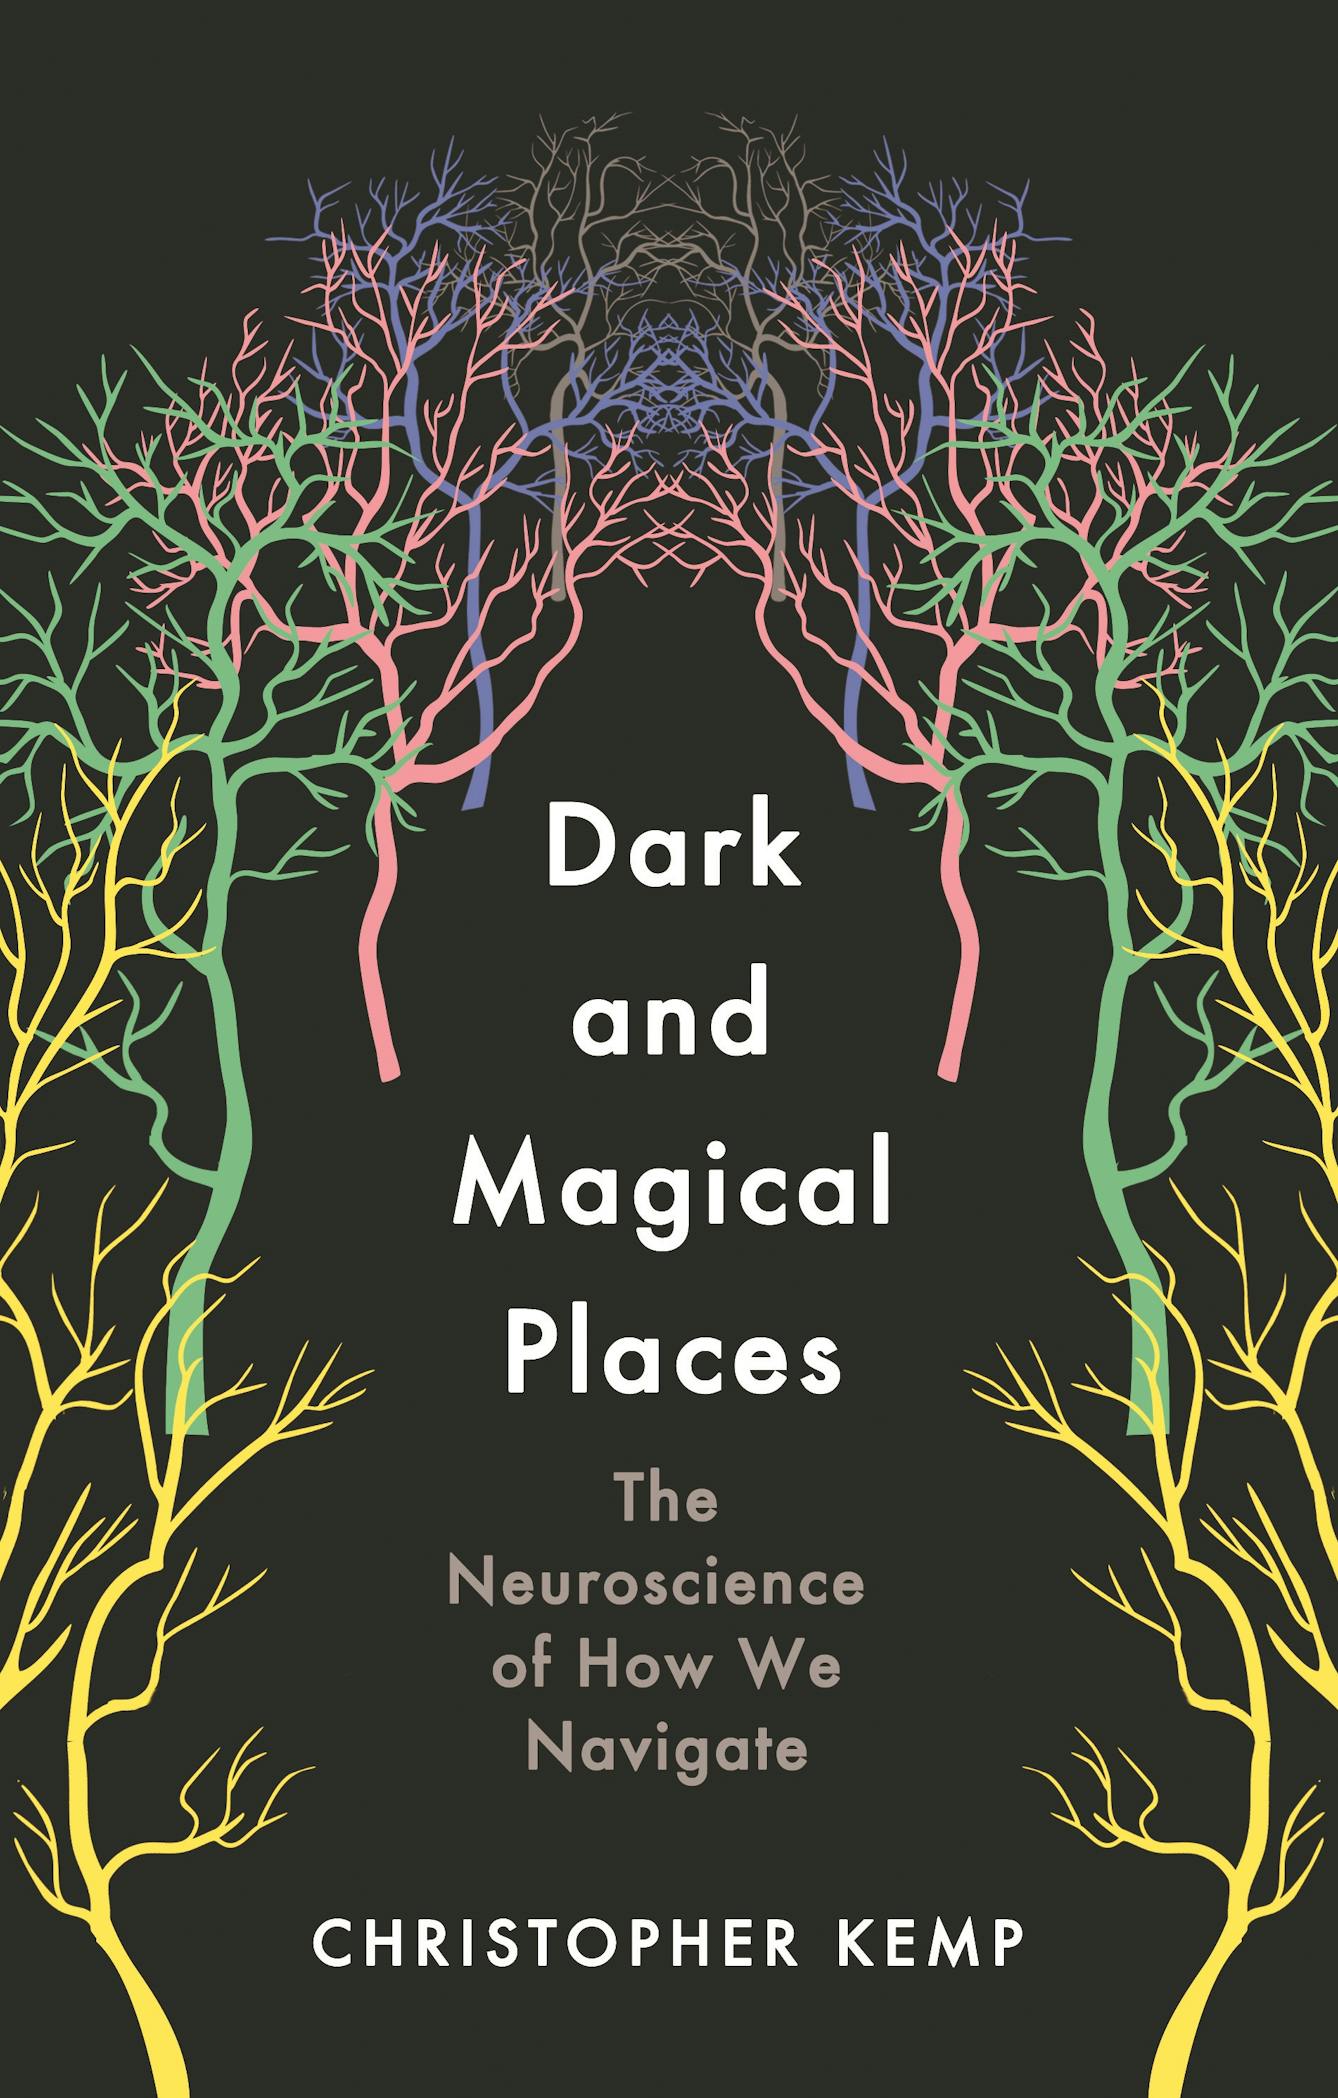 Dark and Magical Places book cover